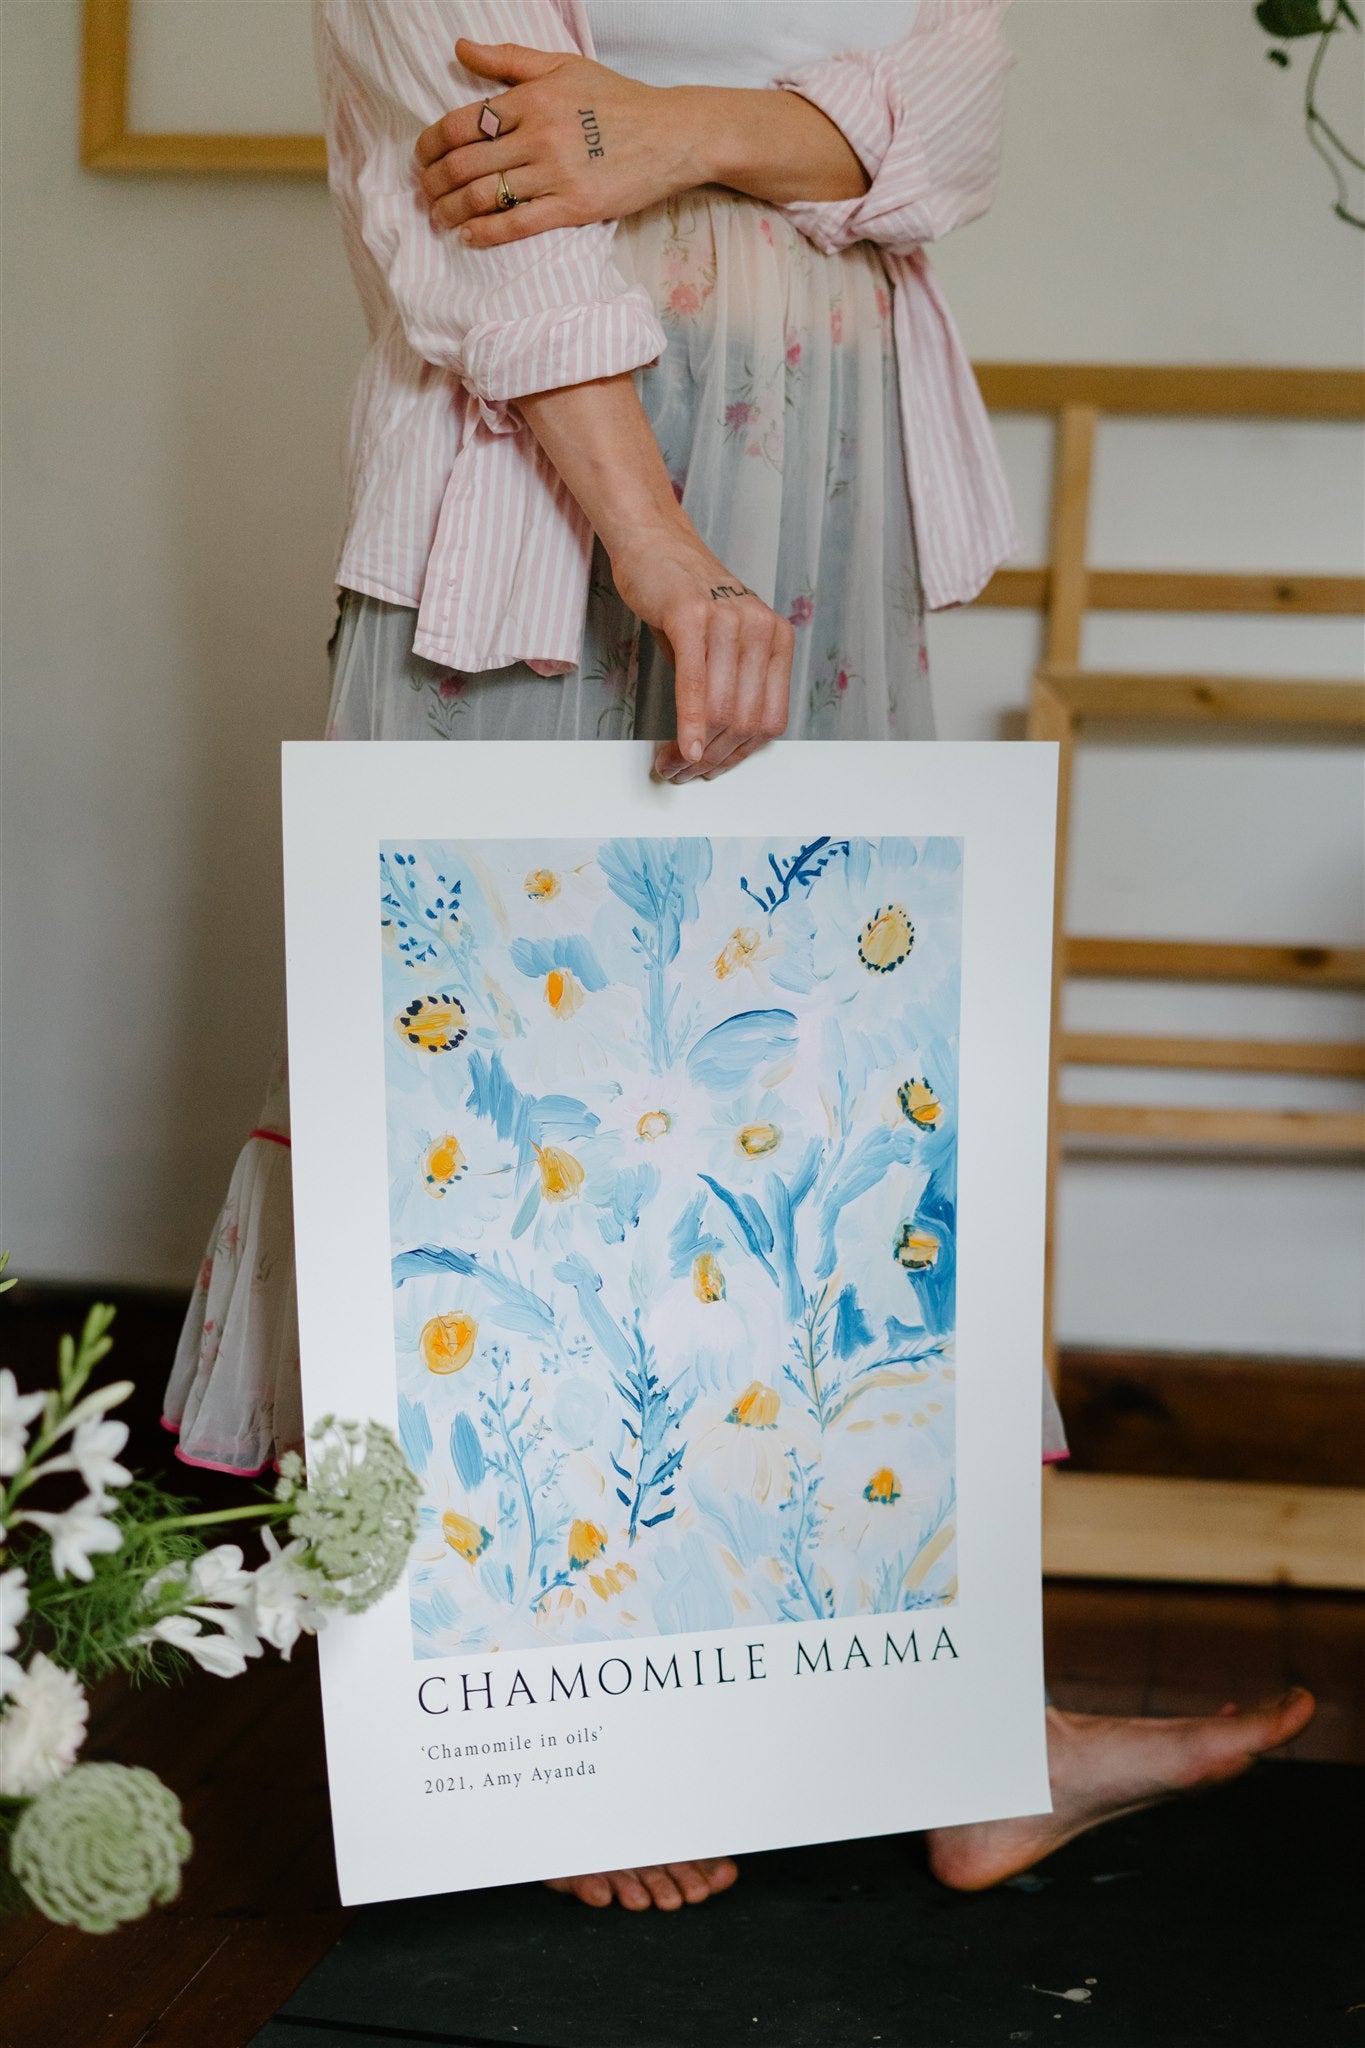 Chamomile Mama Limited Edition Poster